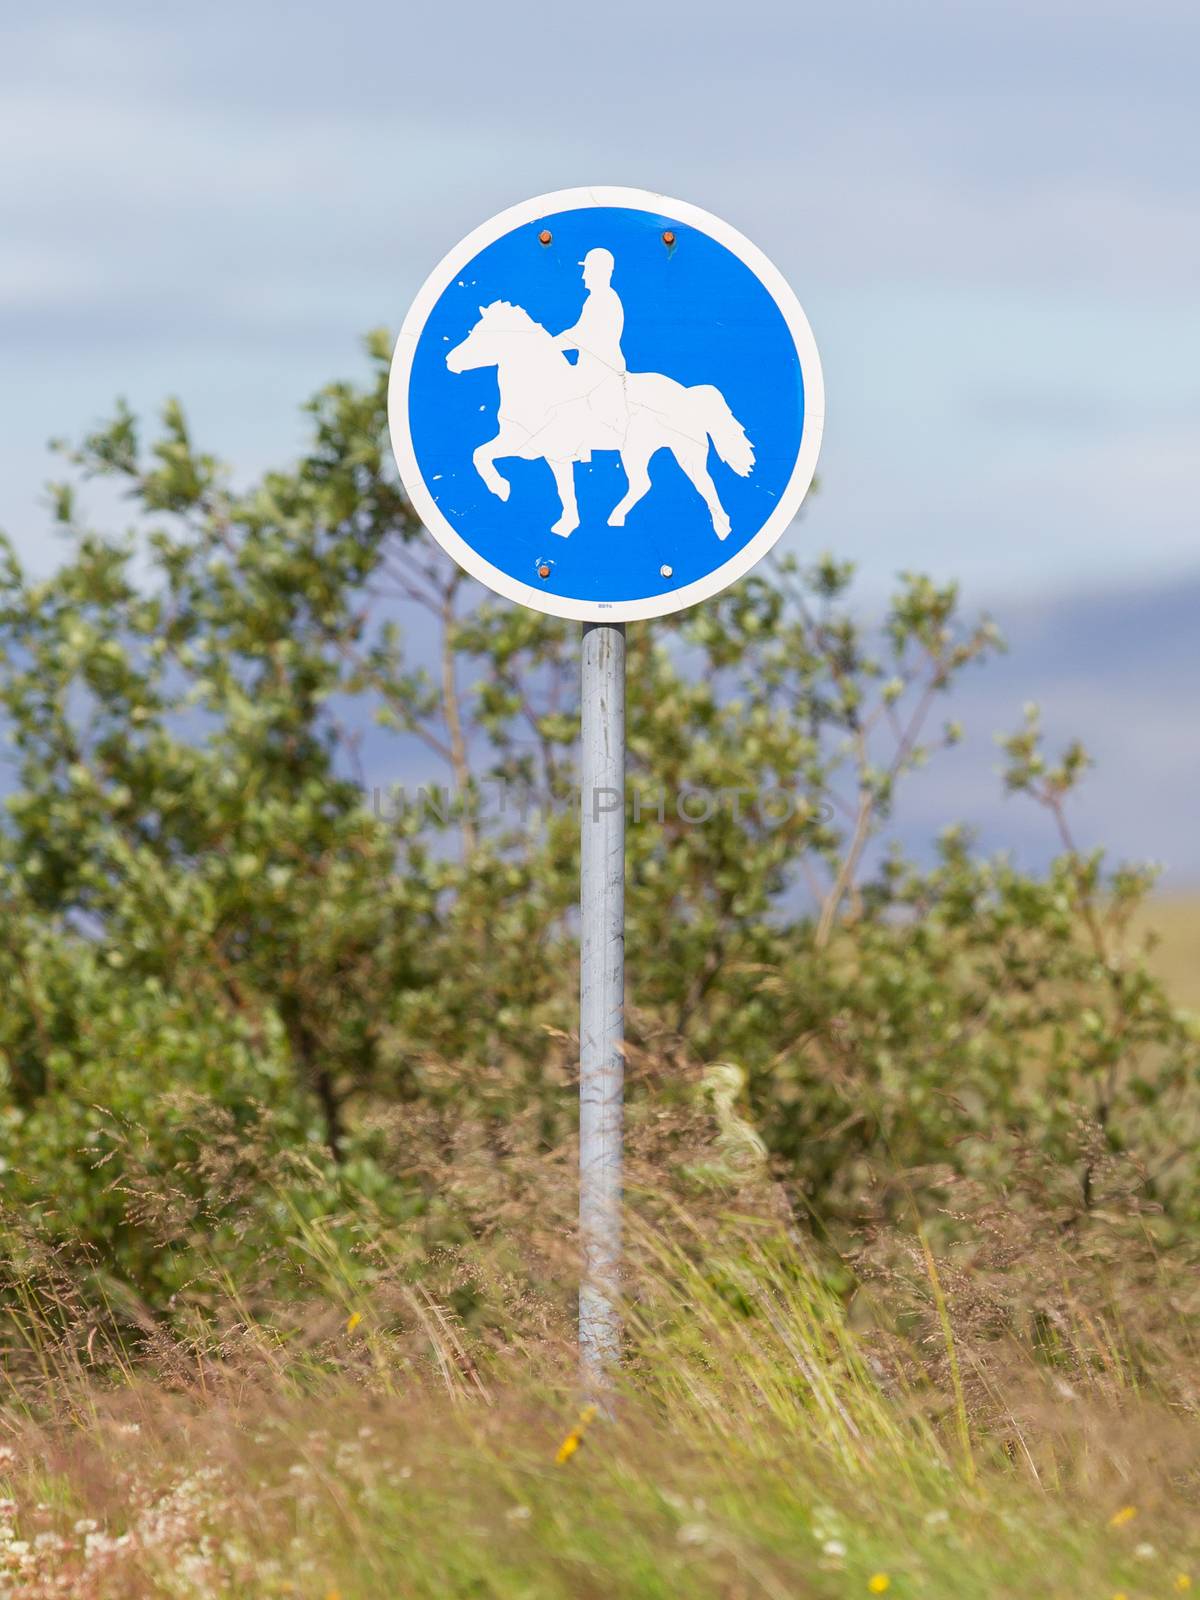 Road sign in Iceland - Equestrian path by michaklootwijk